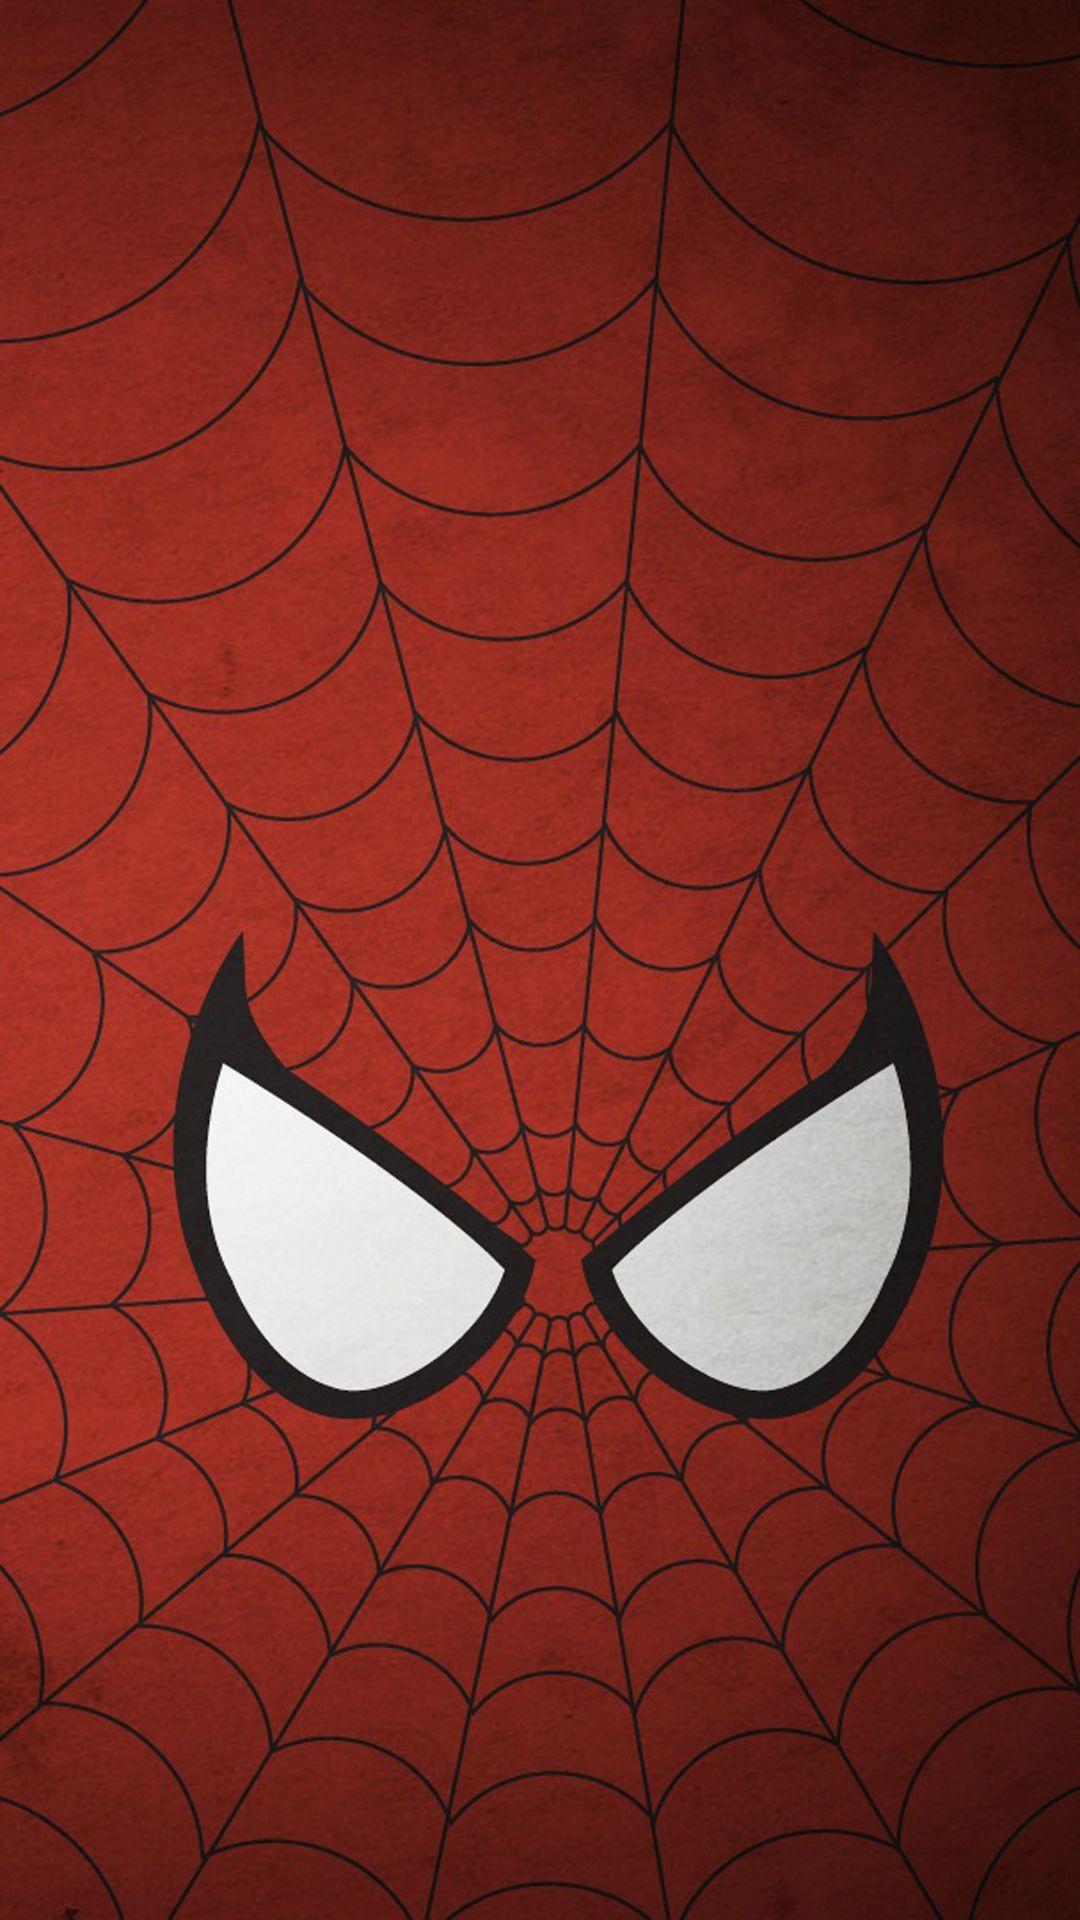 Cute Spiderman Wallpapers - Top Free Cute Spiderman Backgrounds ...